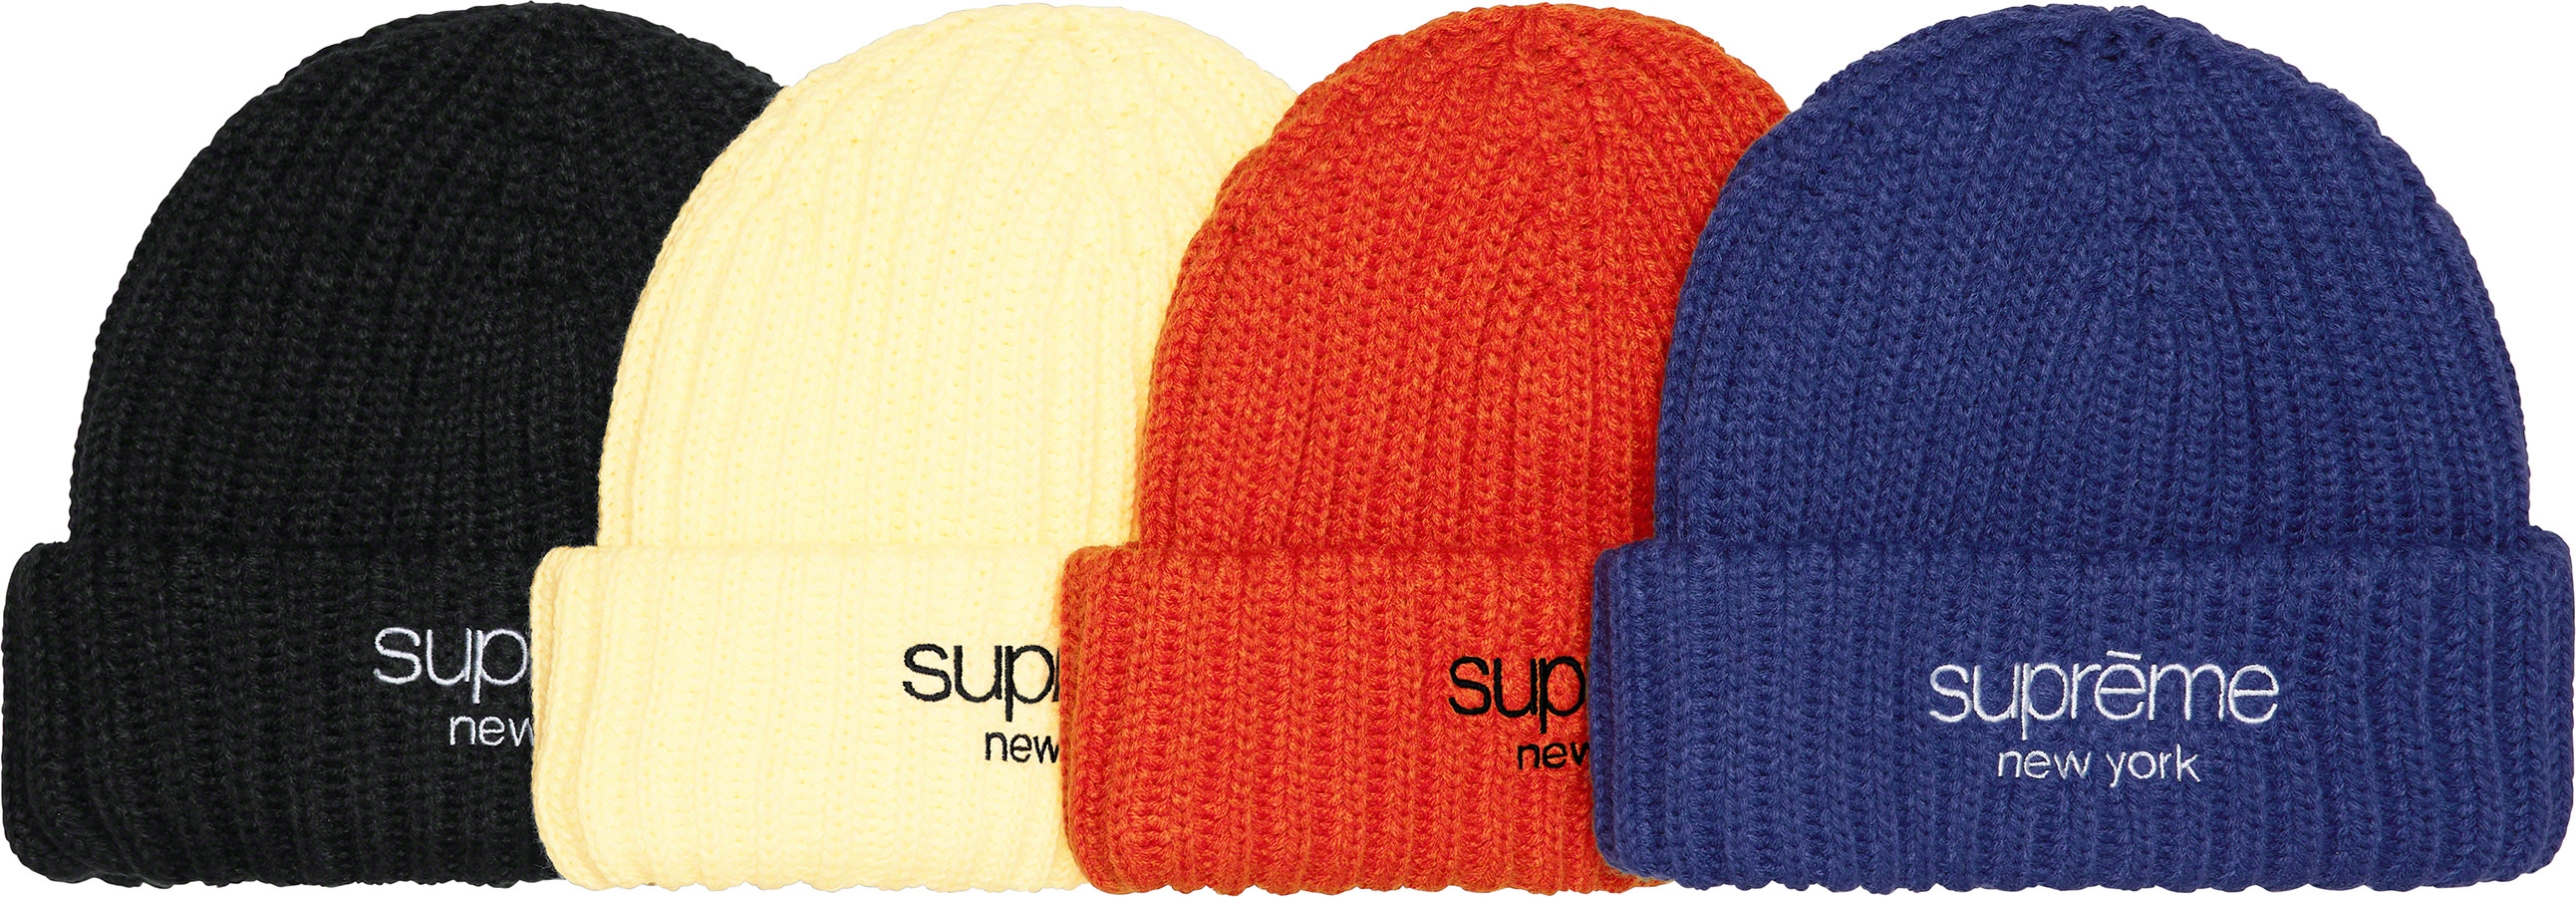 new beanies fit smaller? : r/supremeclothing